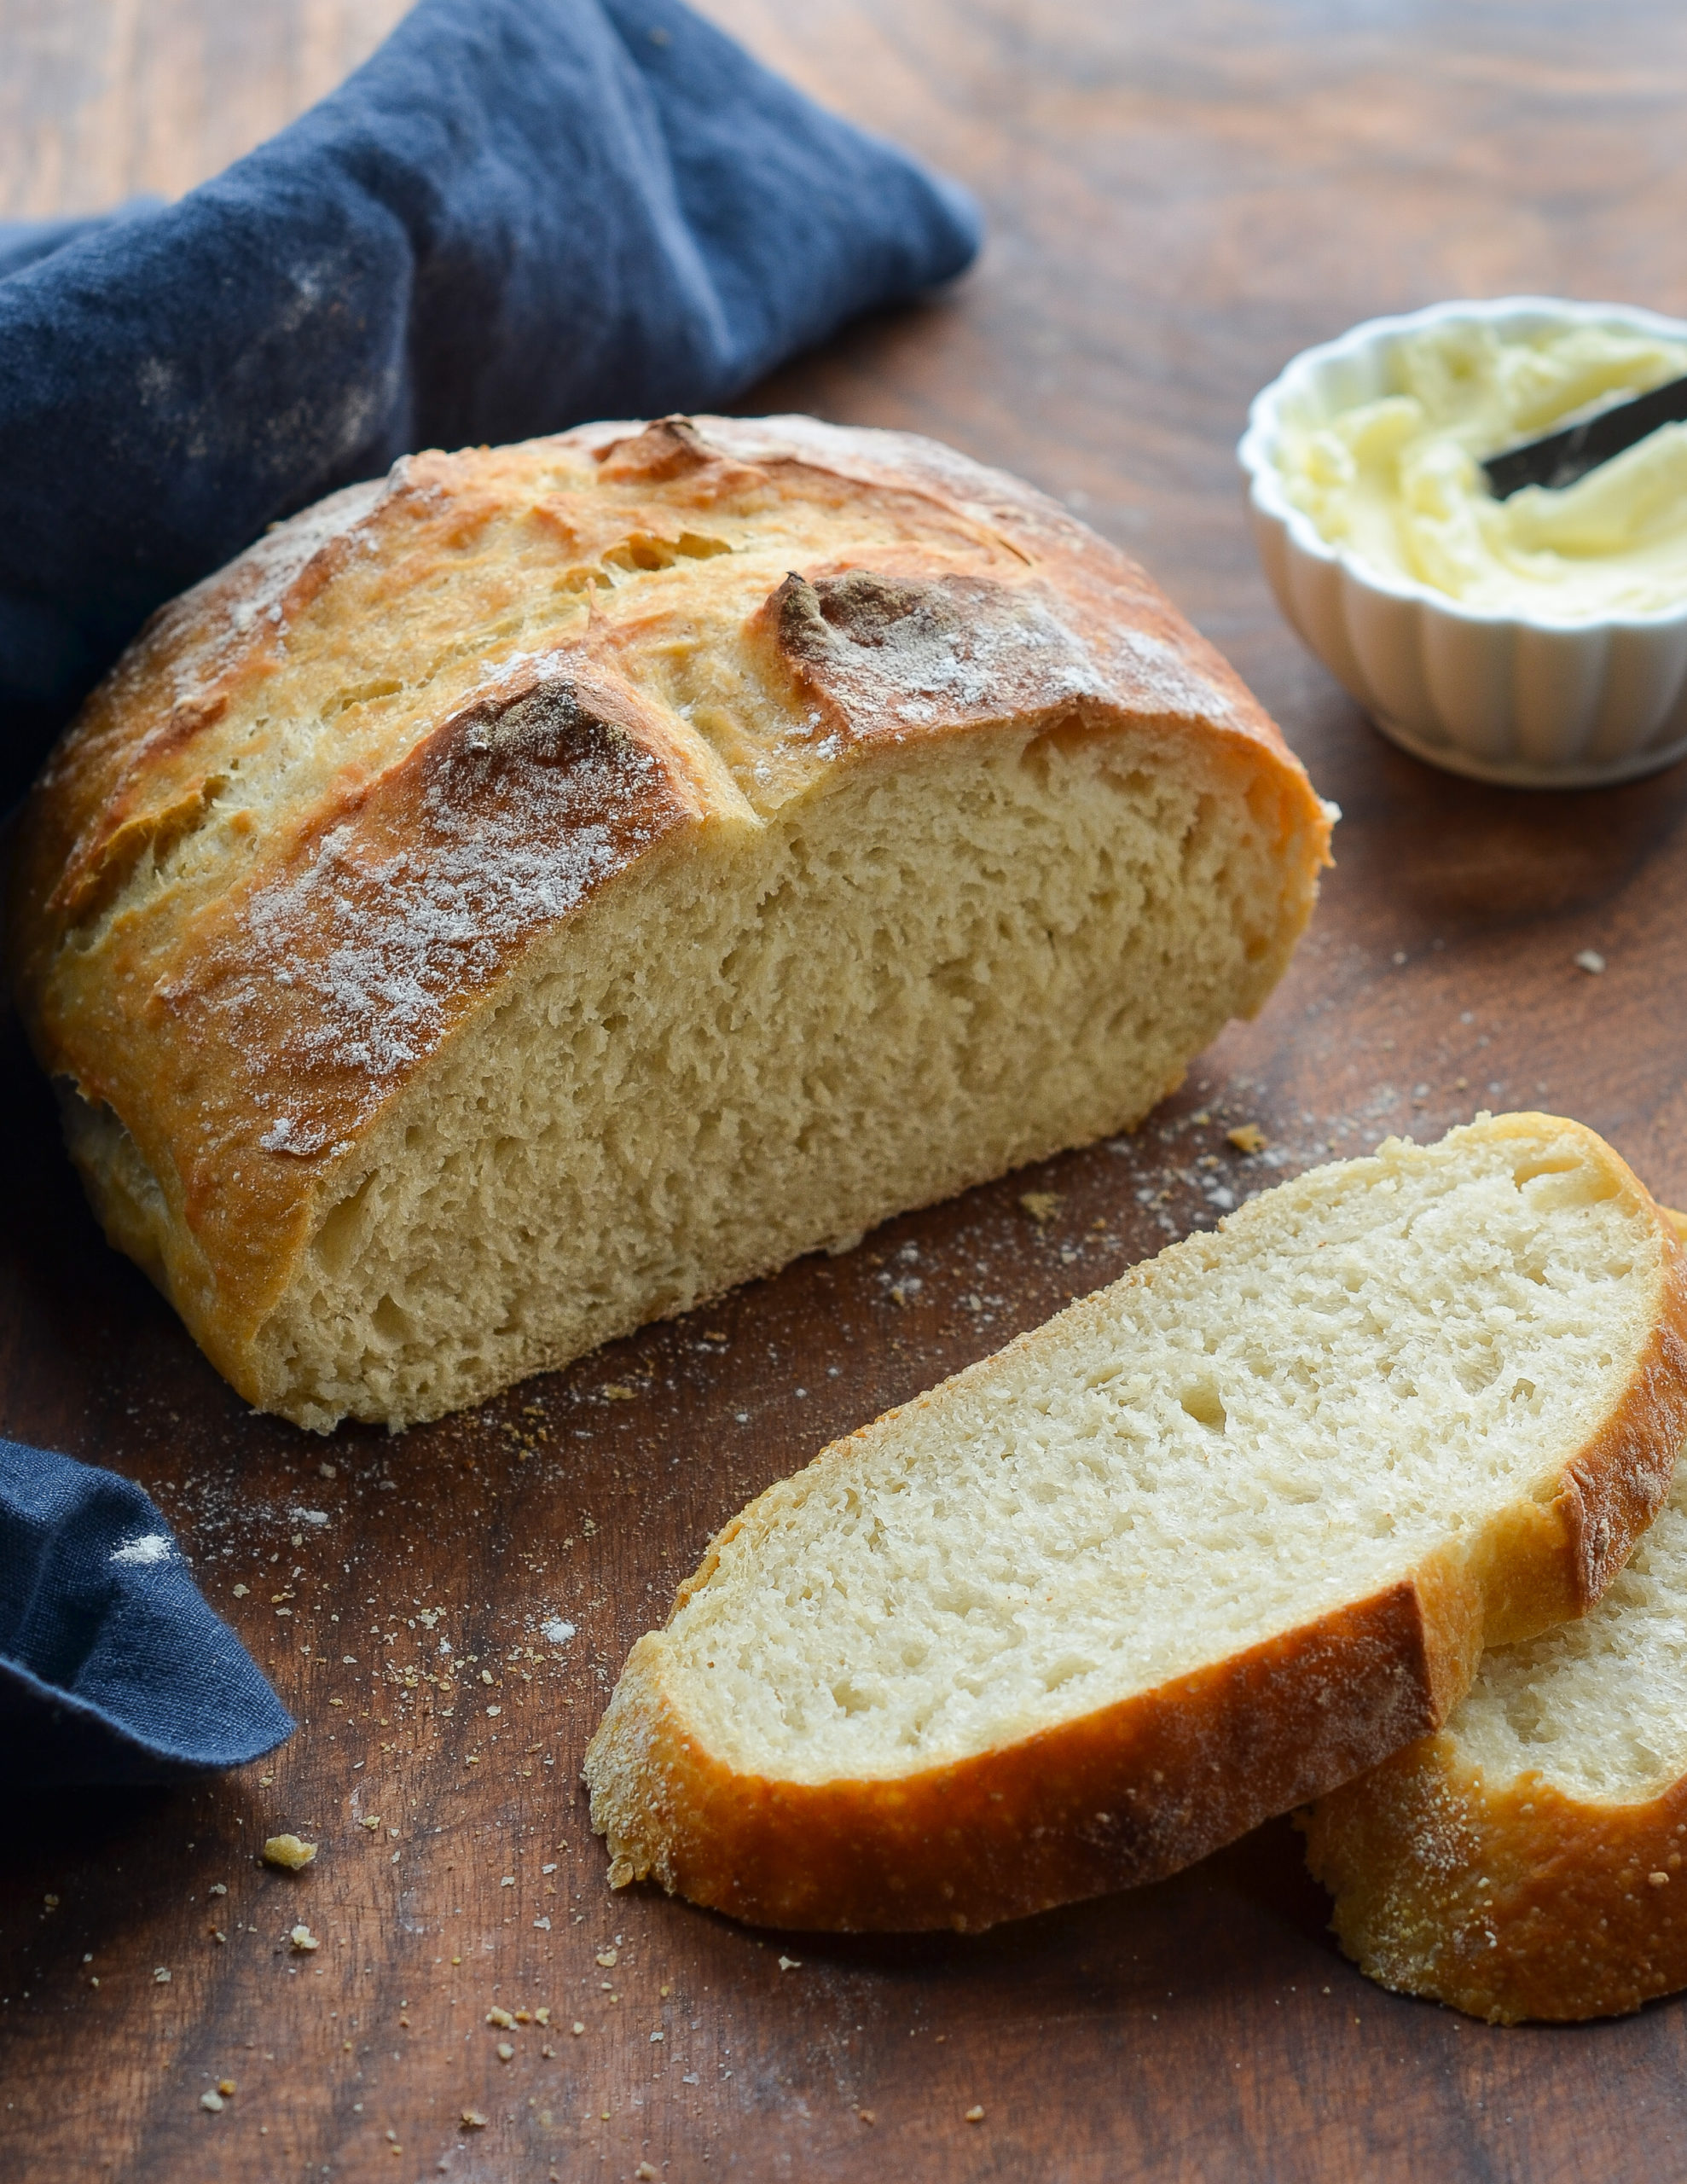 Dutch Oven No Knead Bread (with perfect crusty crust!) - Bowl of Delicious